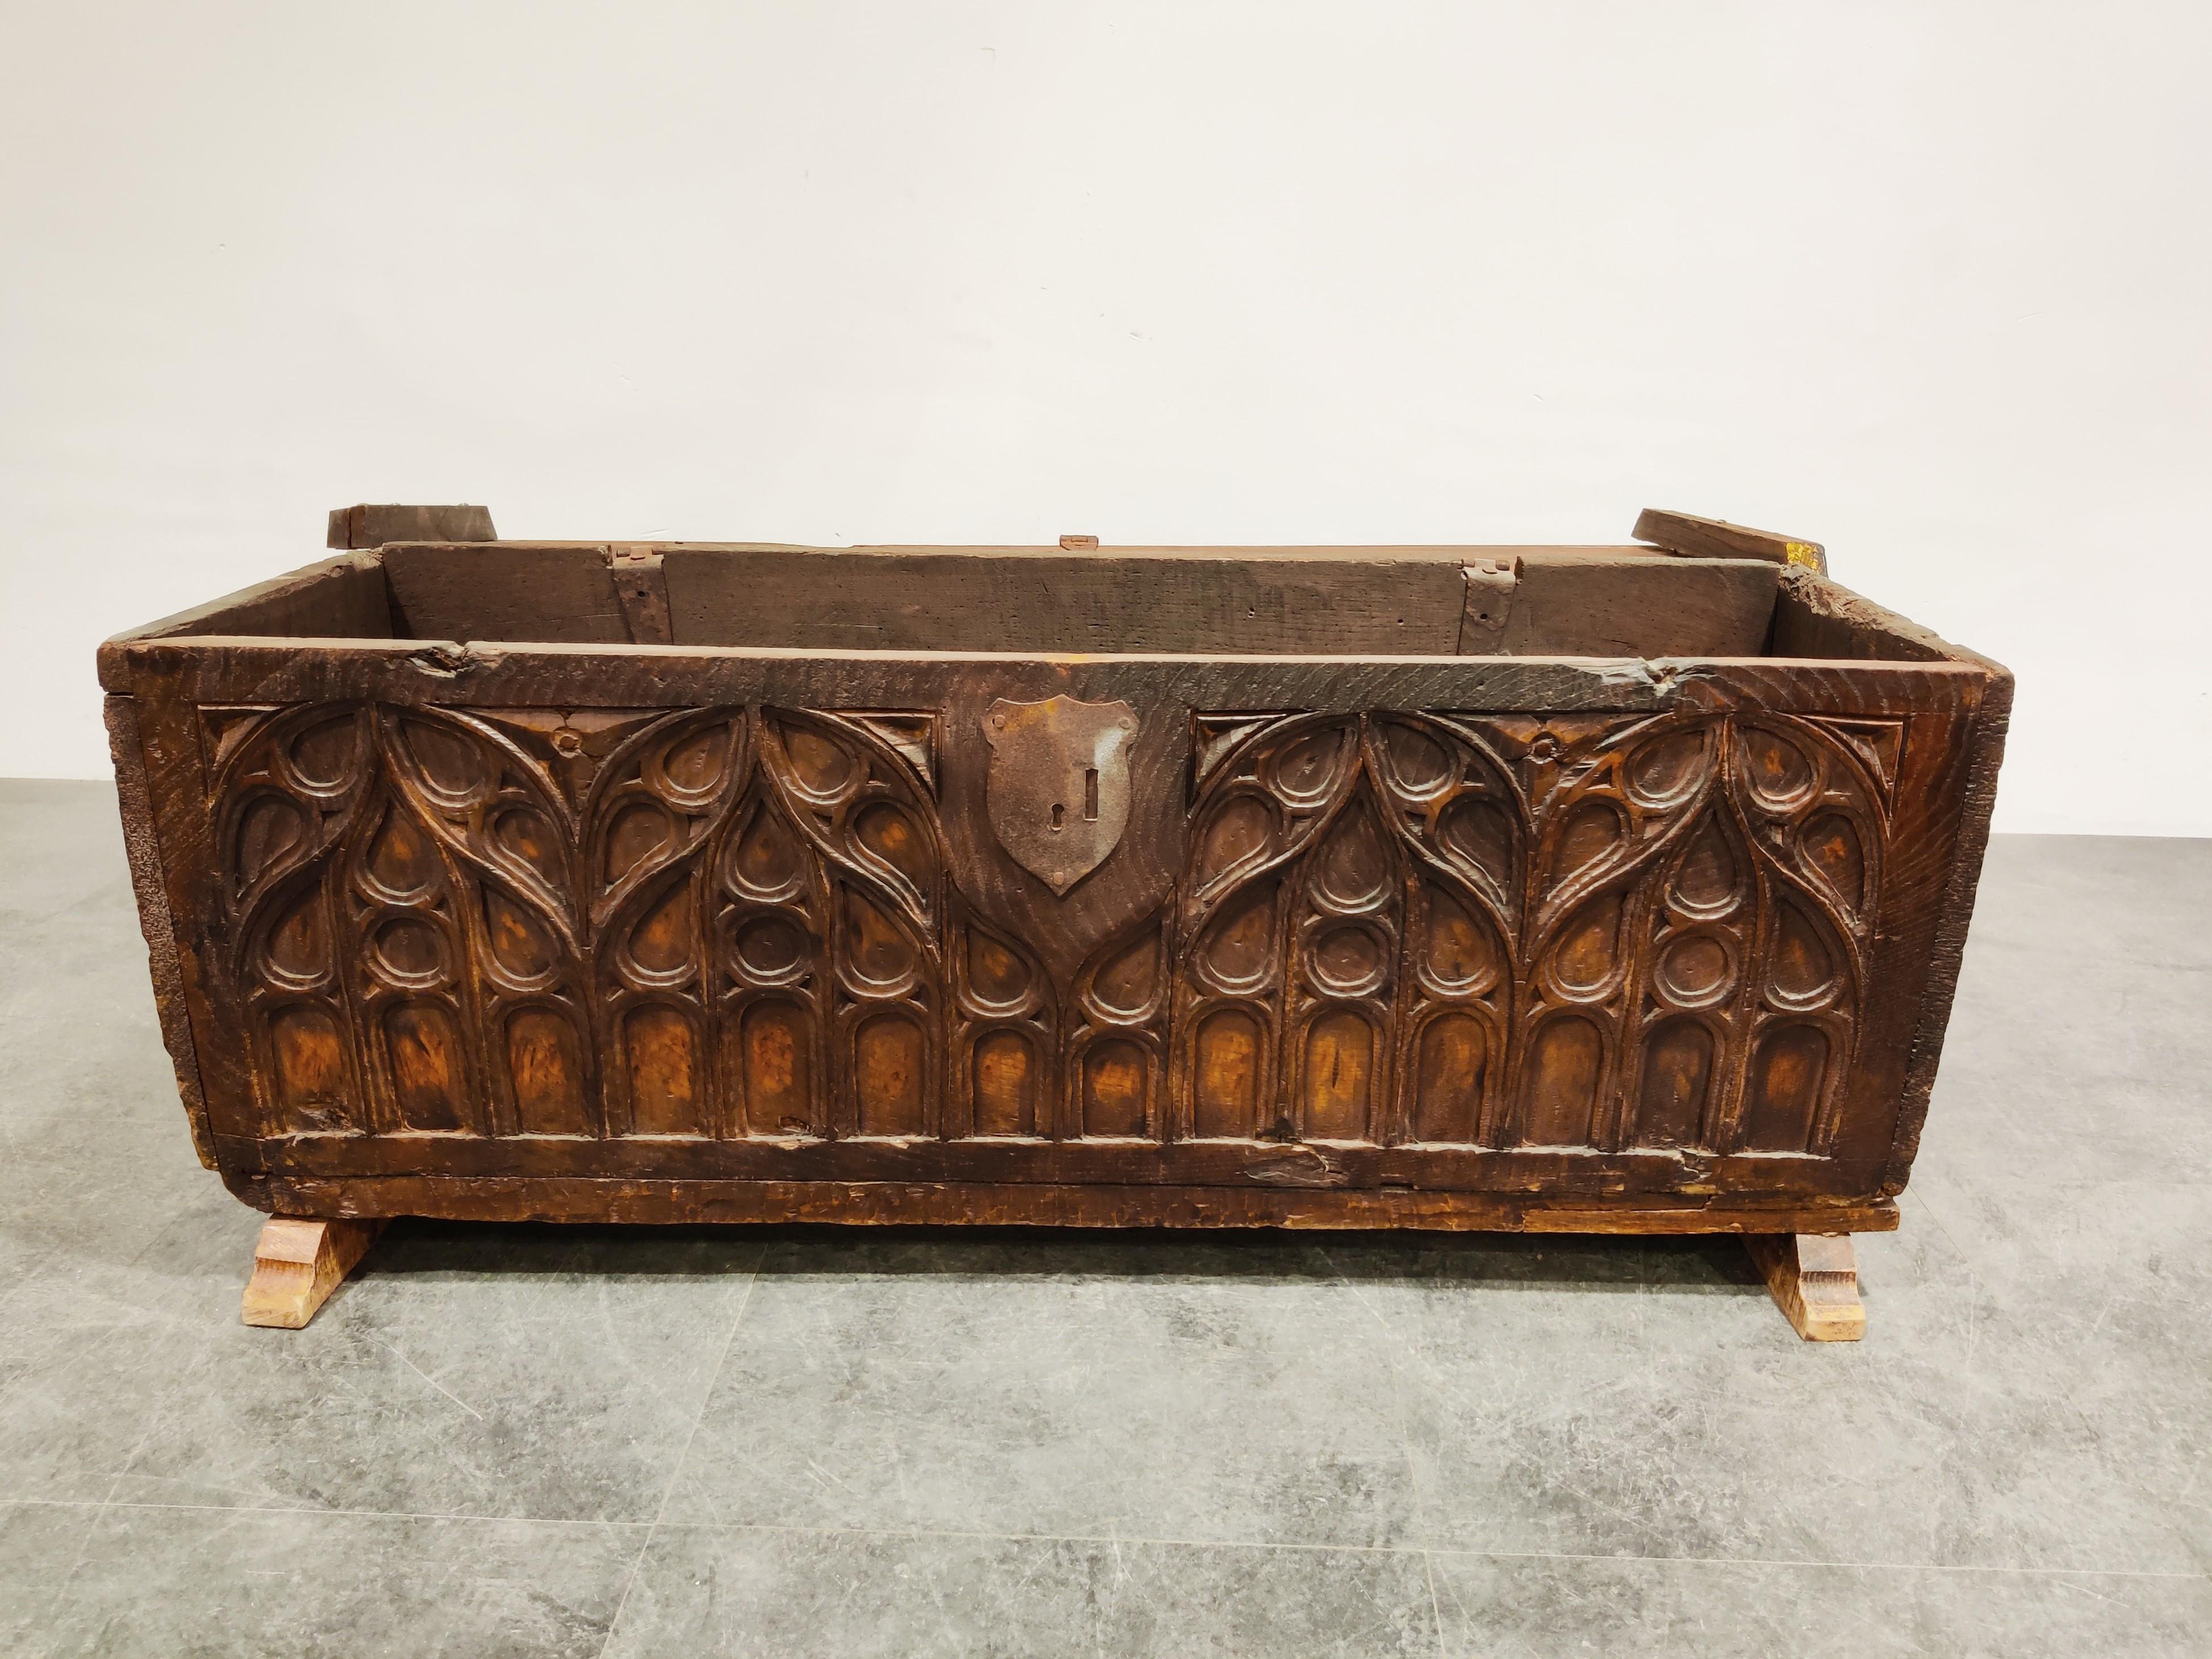 Antique 16th century blanket chest with Gothic carvings made from elm wood.

The hinged lid above a front panel with wrought iron hasp and three ogee lancet panels carved with tracery, on sledge feet.

The chest is made from various components,